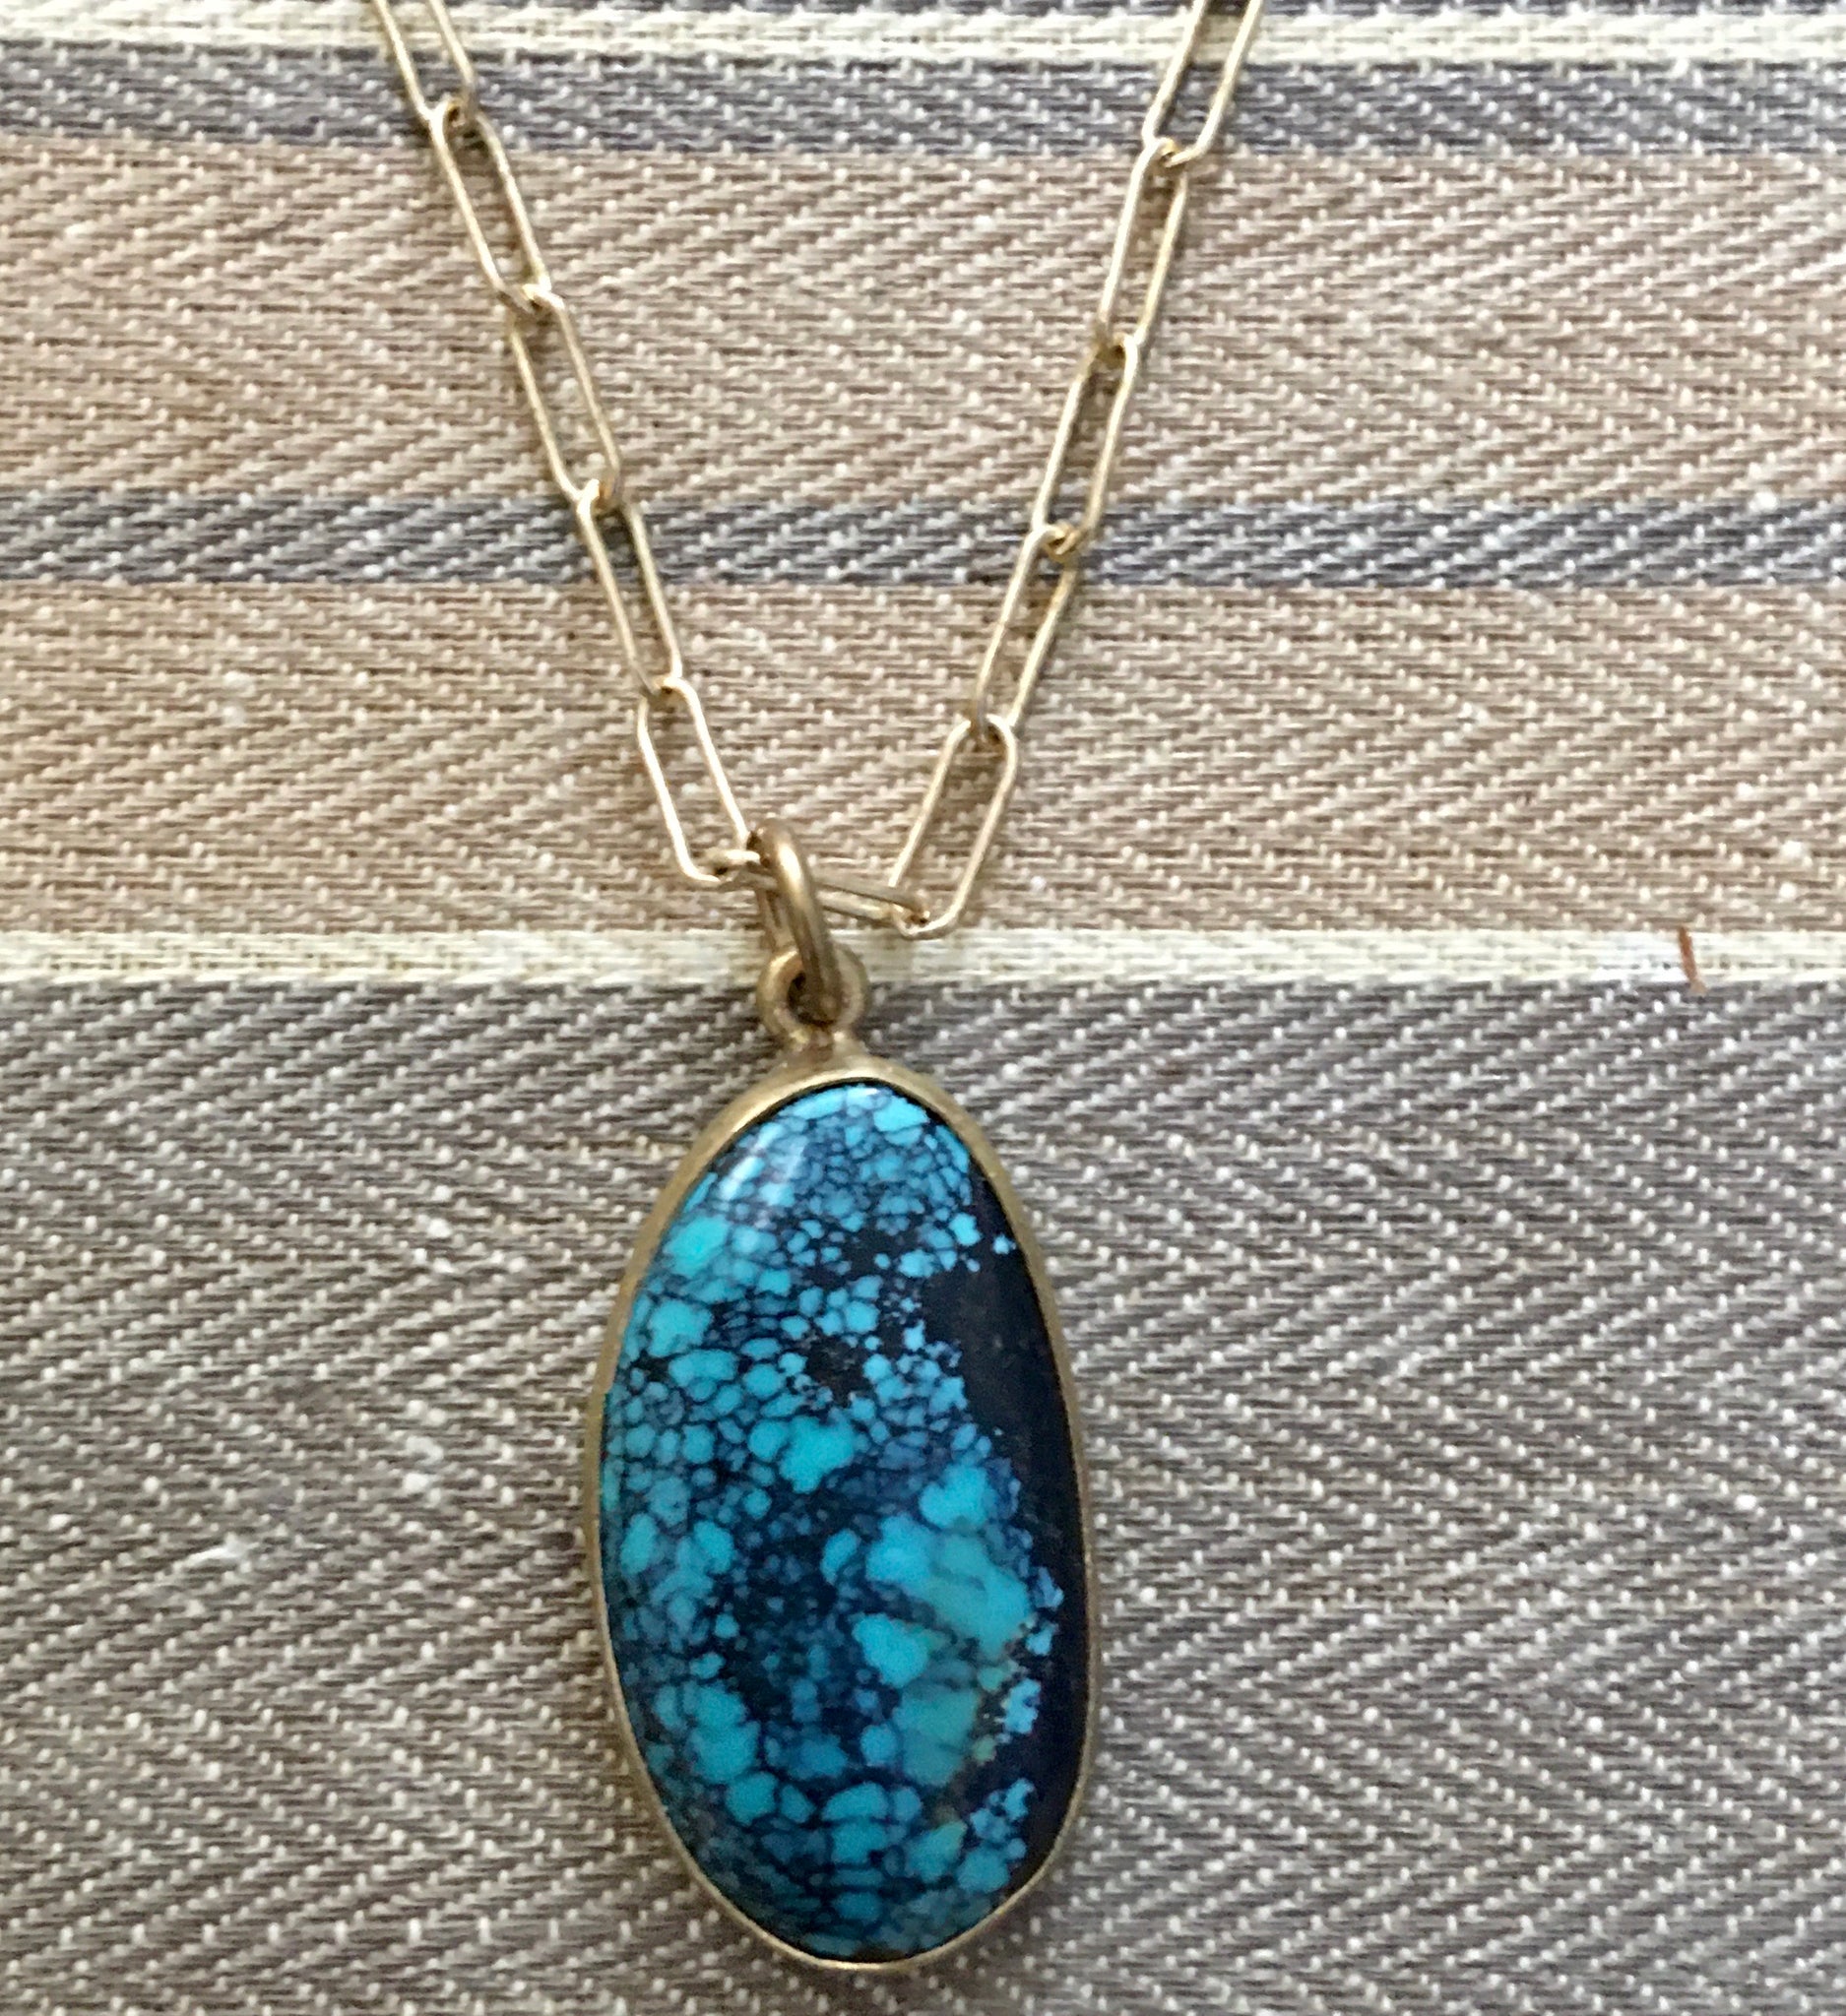 Simple Oval turquoise pendant